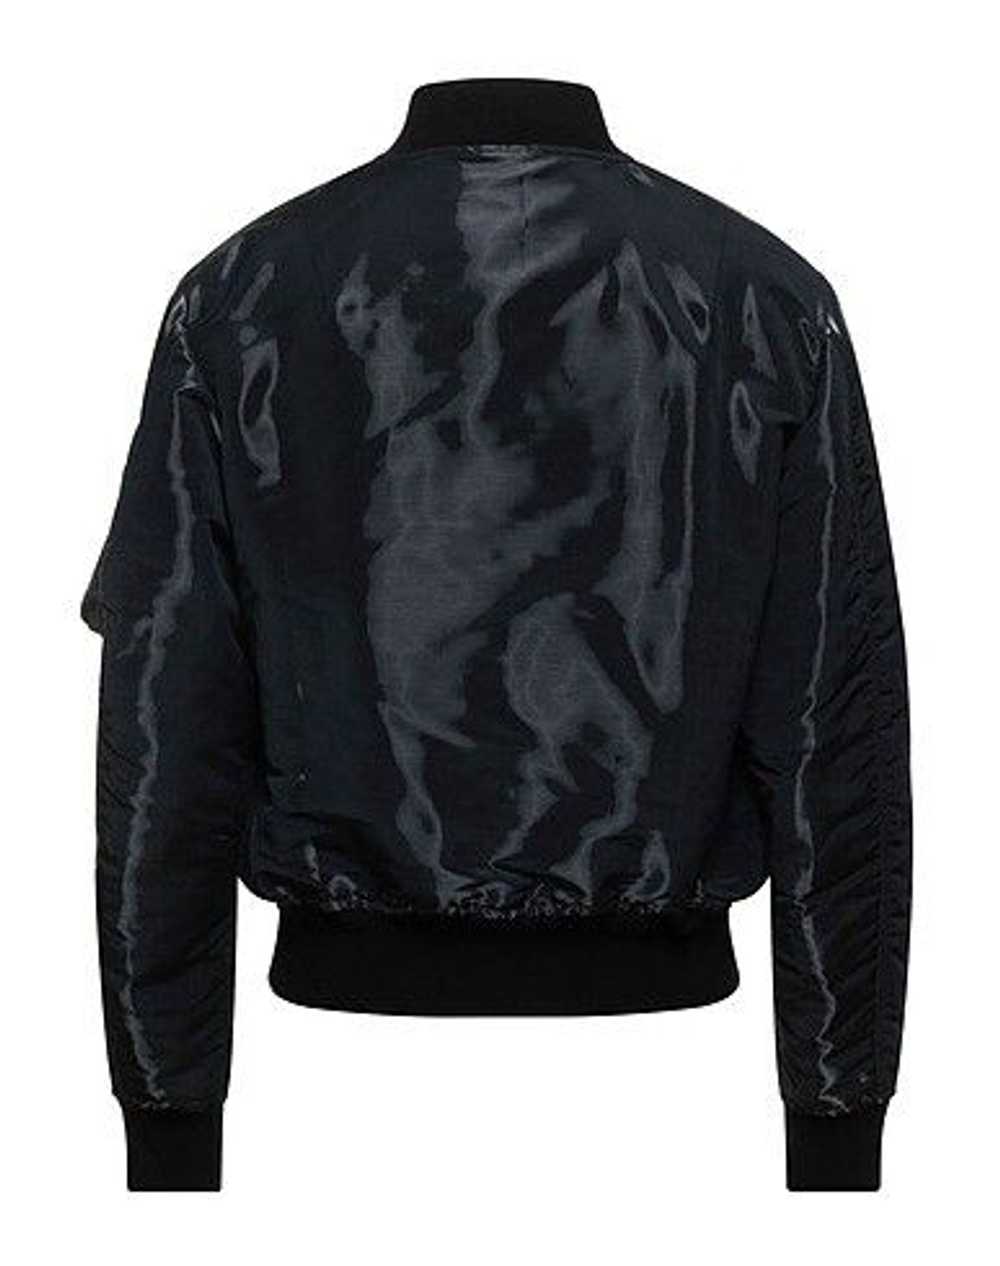 Givenchy Bomber in Black - image 2